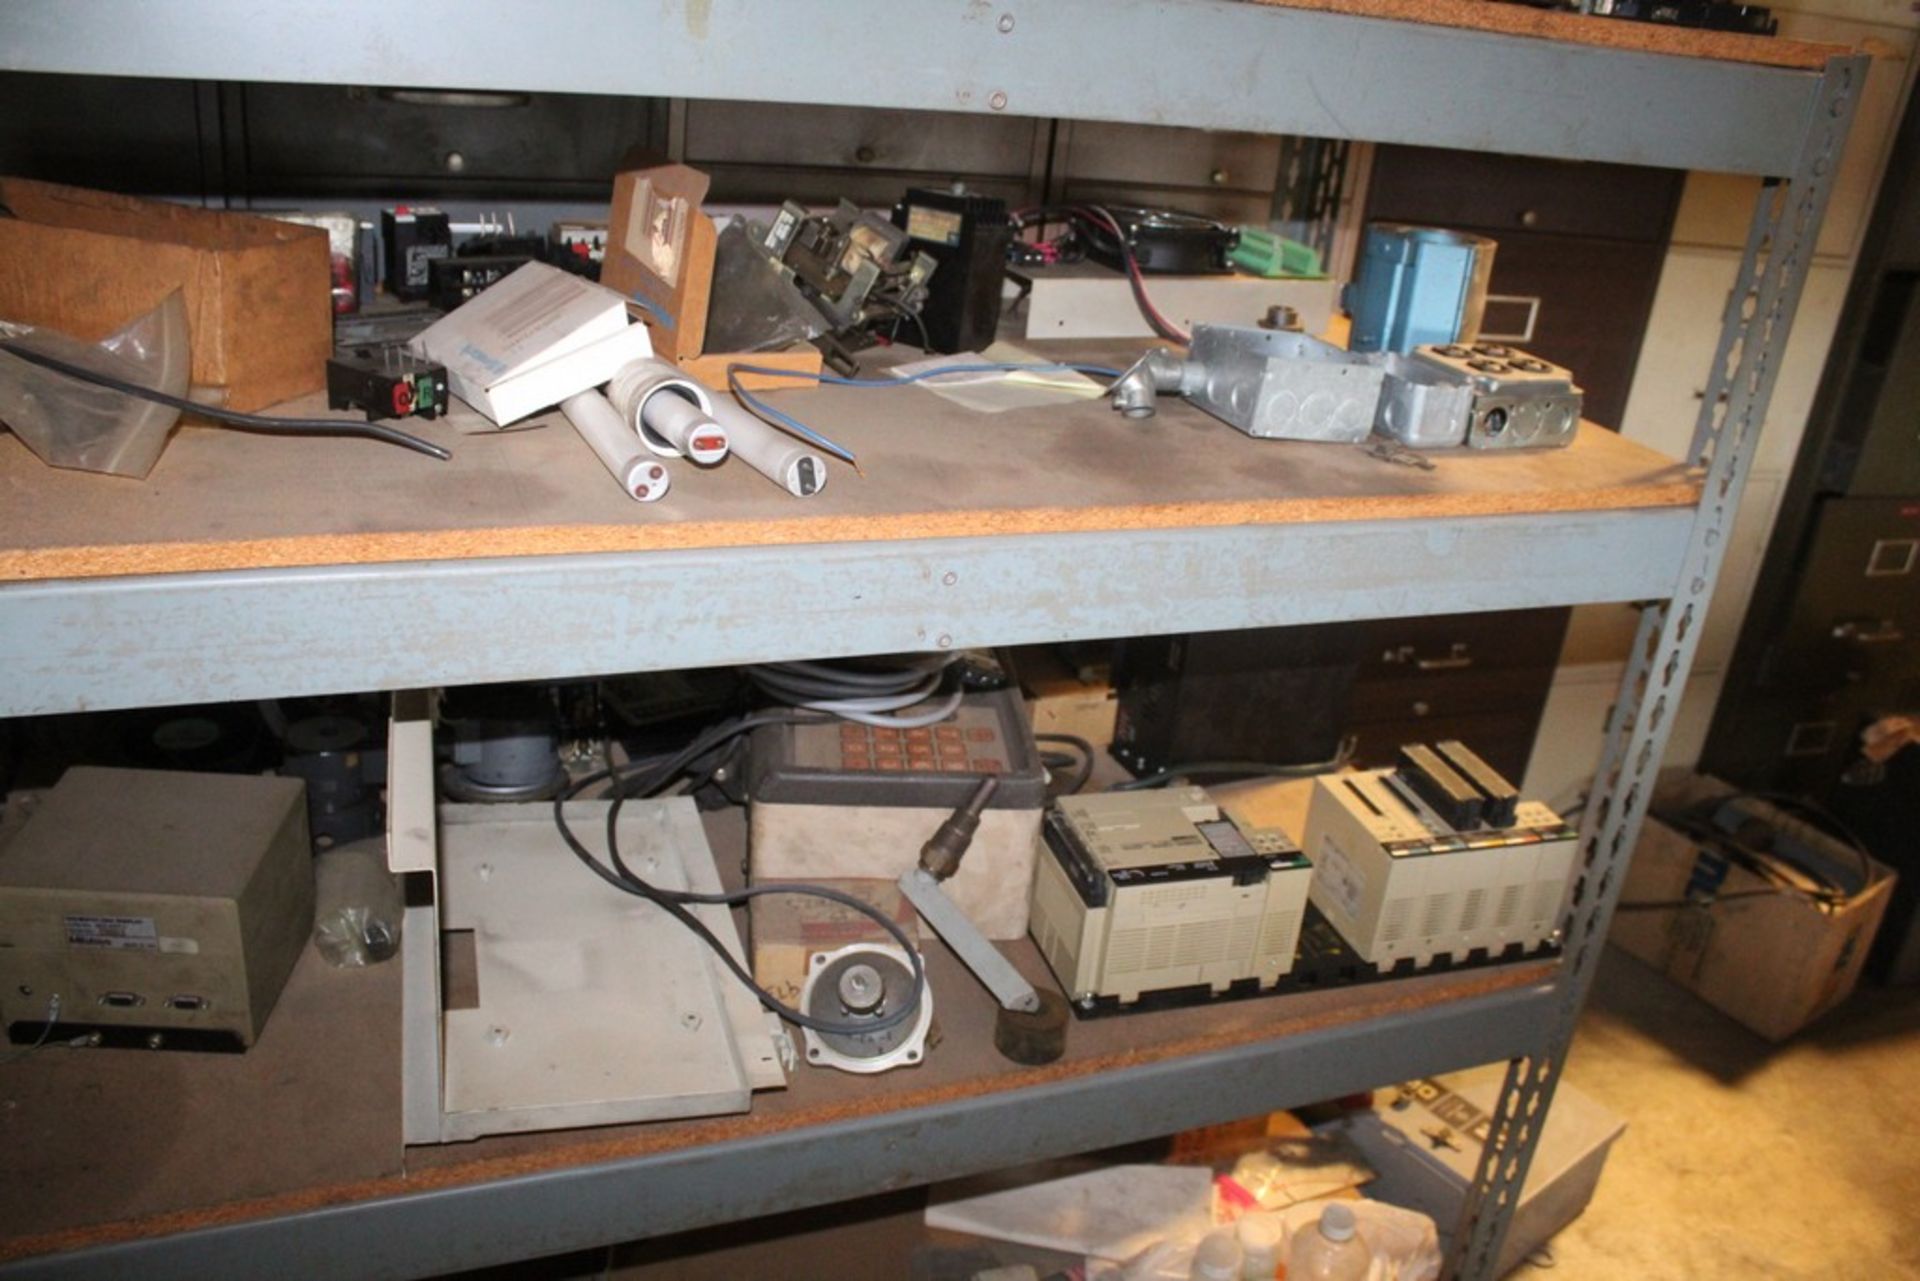 LARGE QTY OF ELECTRICAL PARTS ON SHELVING UNIT - Image 2 of 2